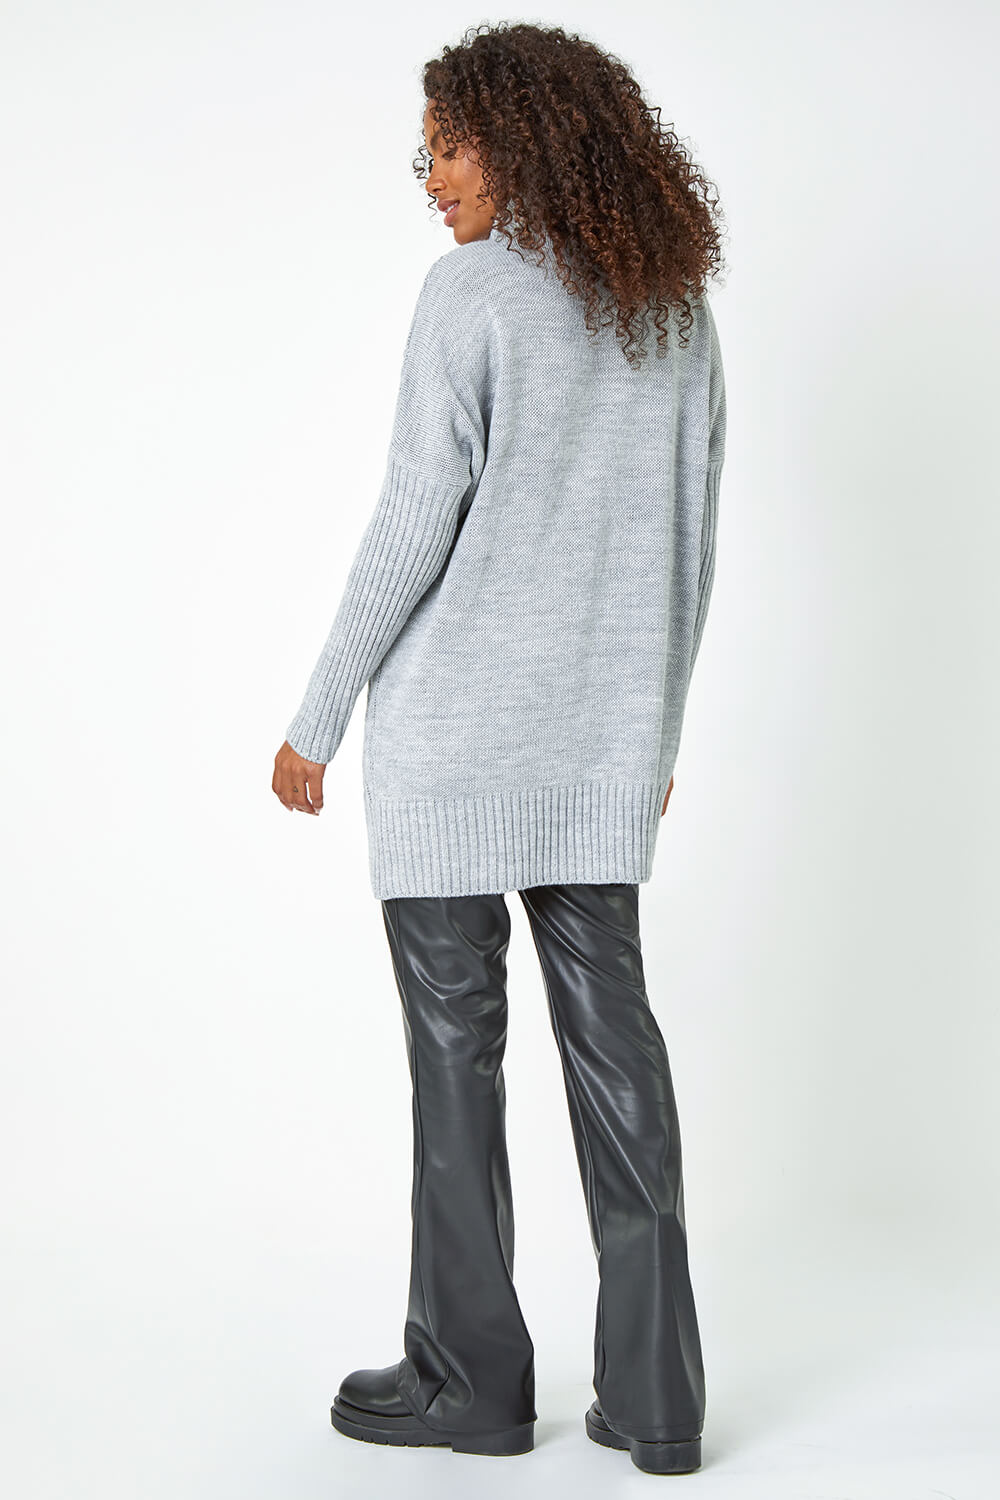 Grey Pearl Embellished Cable Knit Longline Jumper, Image 3 of 5